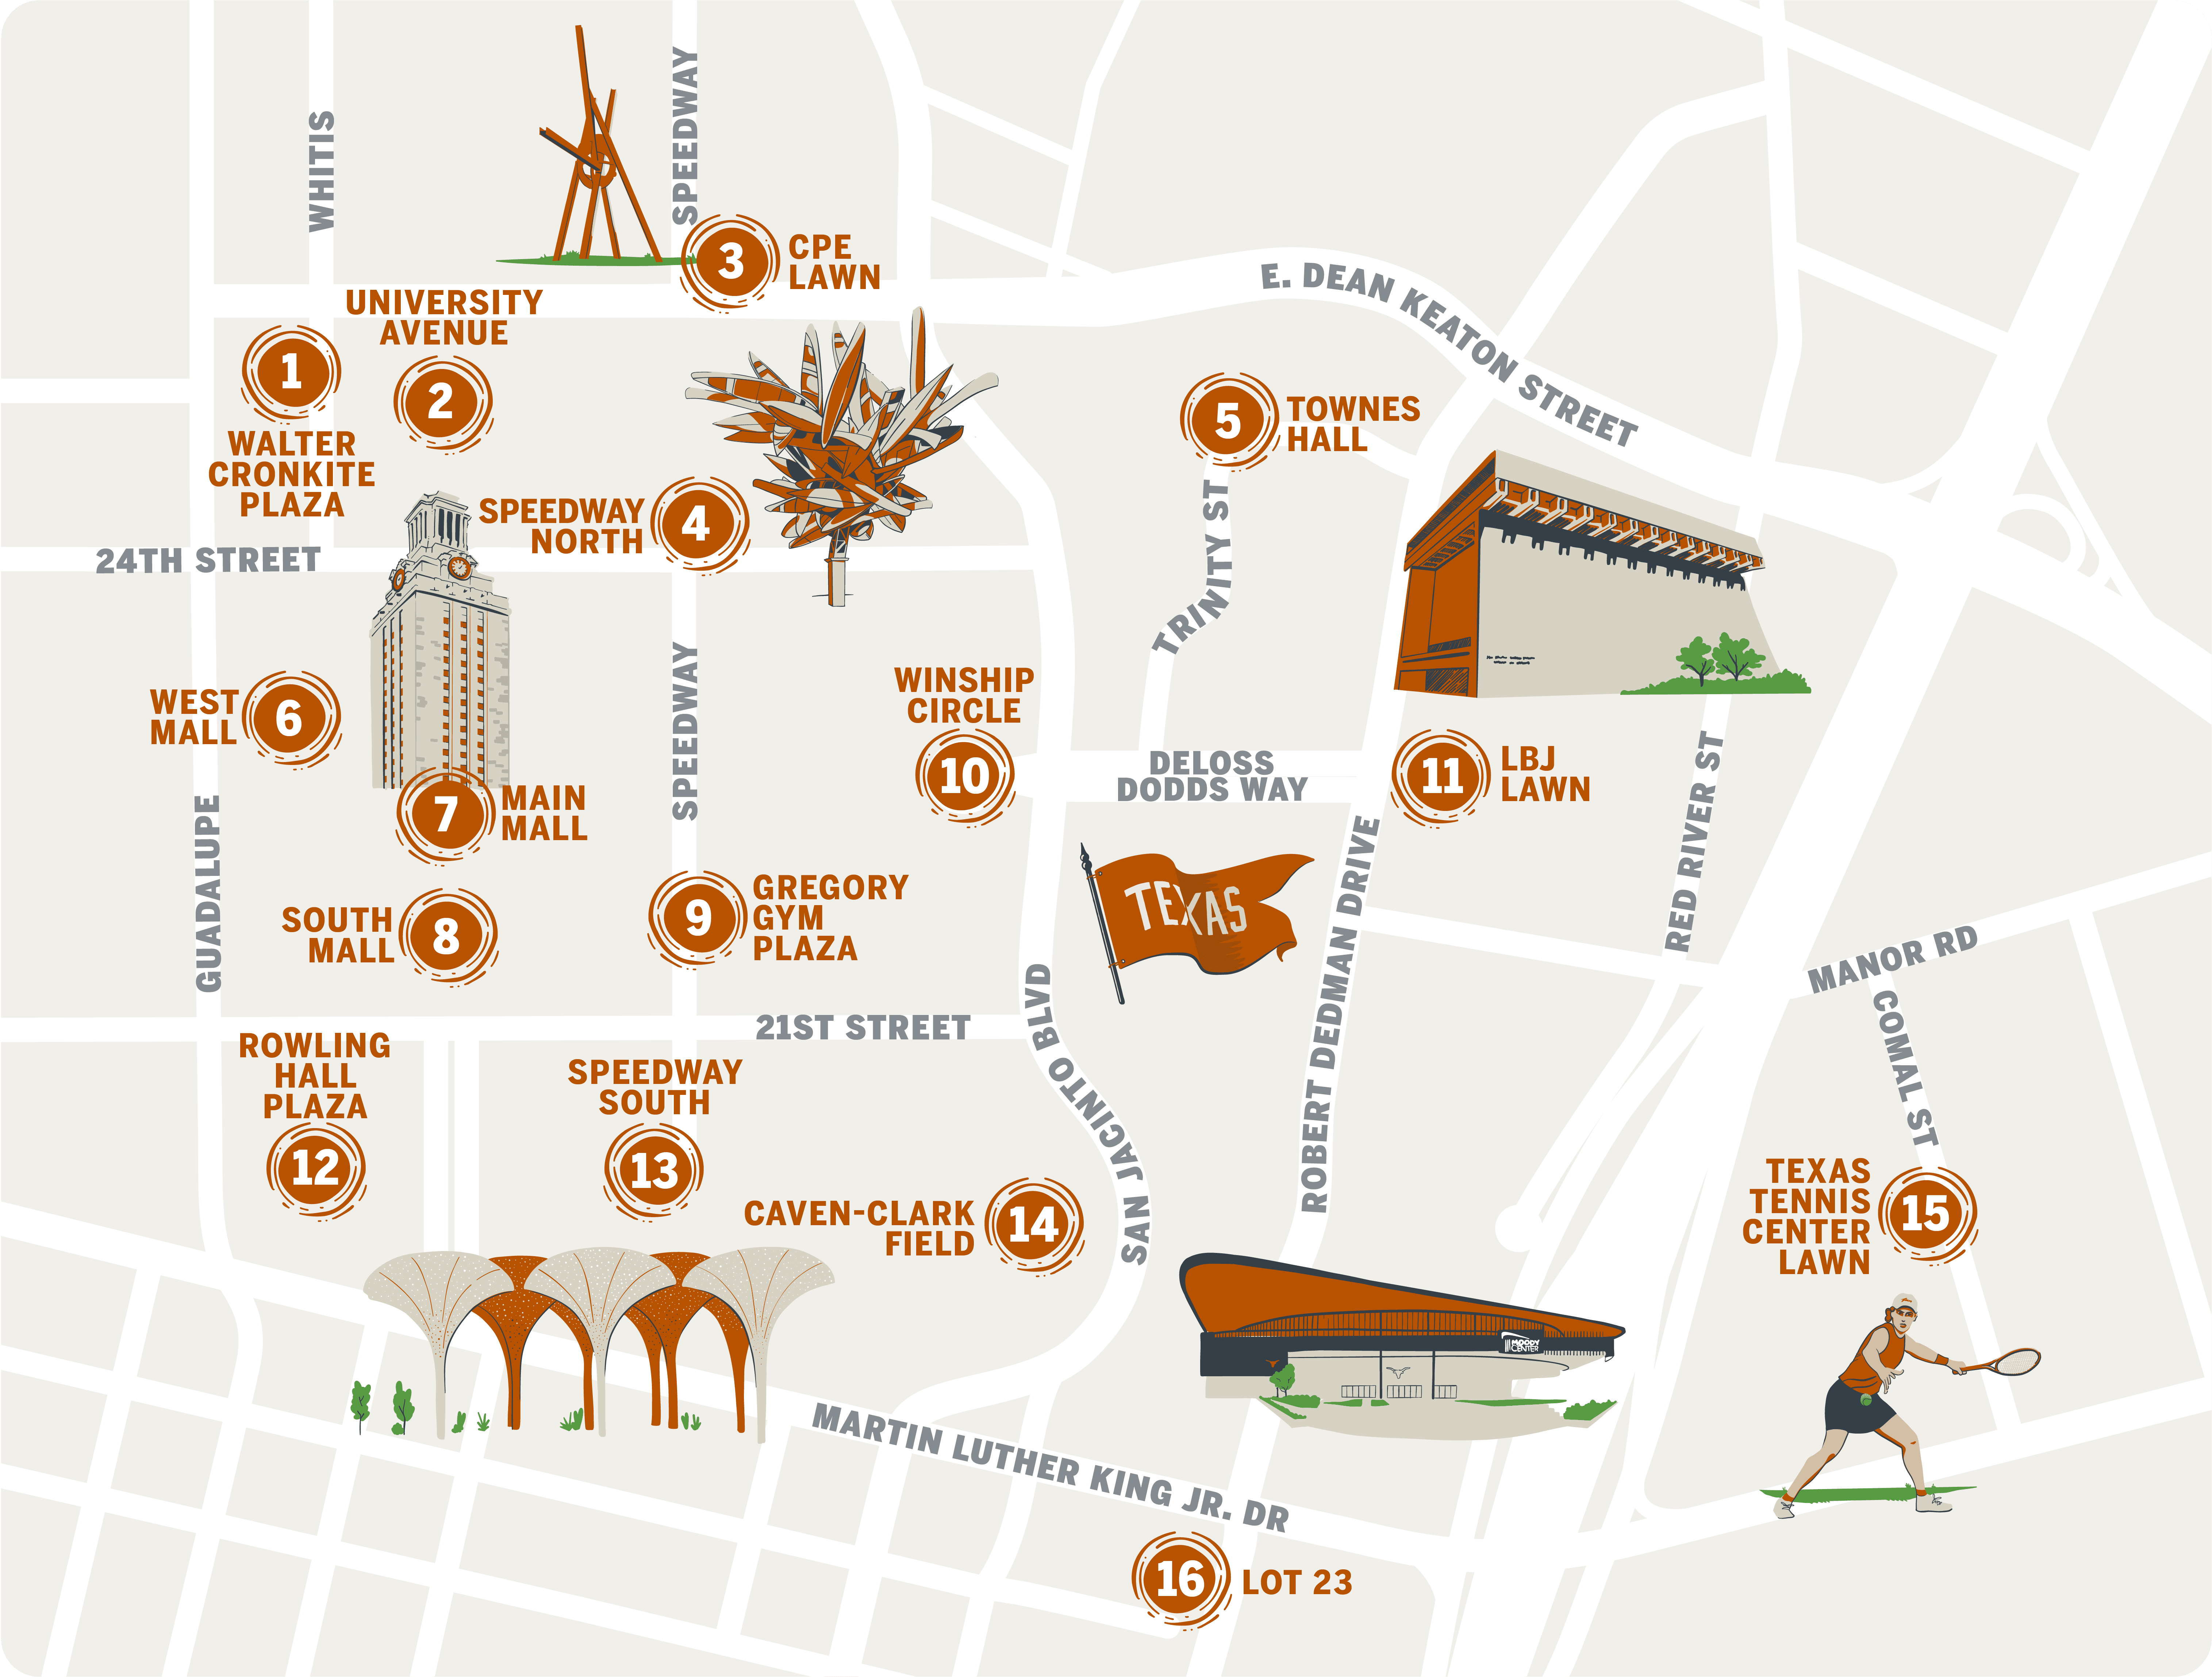 Illustrated map of UT campus marking the spots on campus where you can pick up your burnt-orange eclipse glasses, see the sun through a telescope, and learn more.